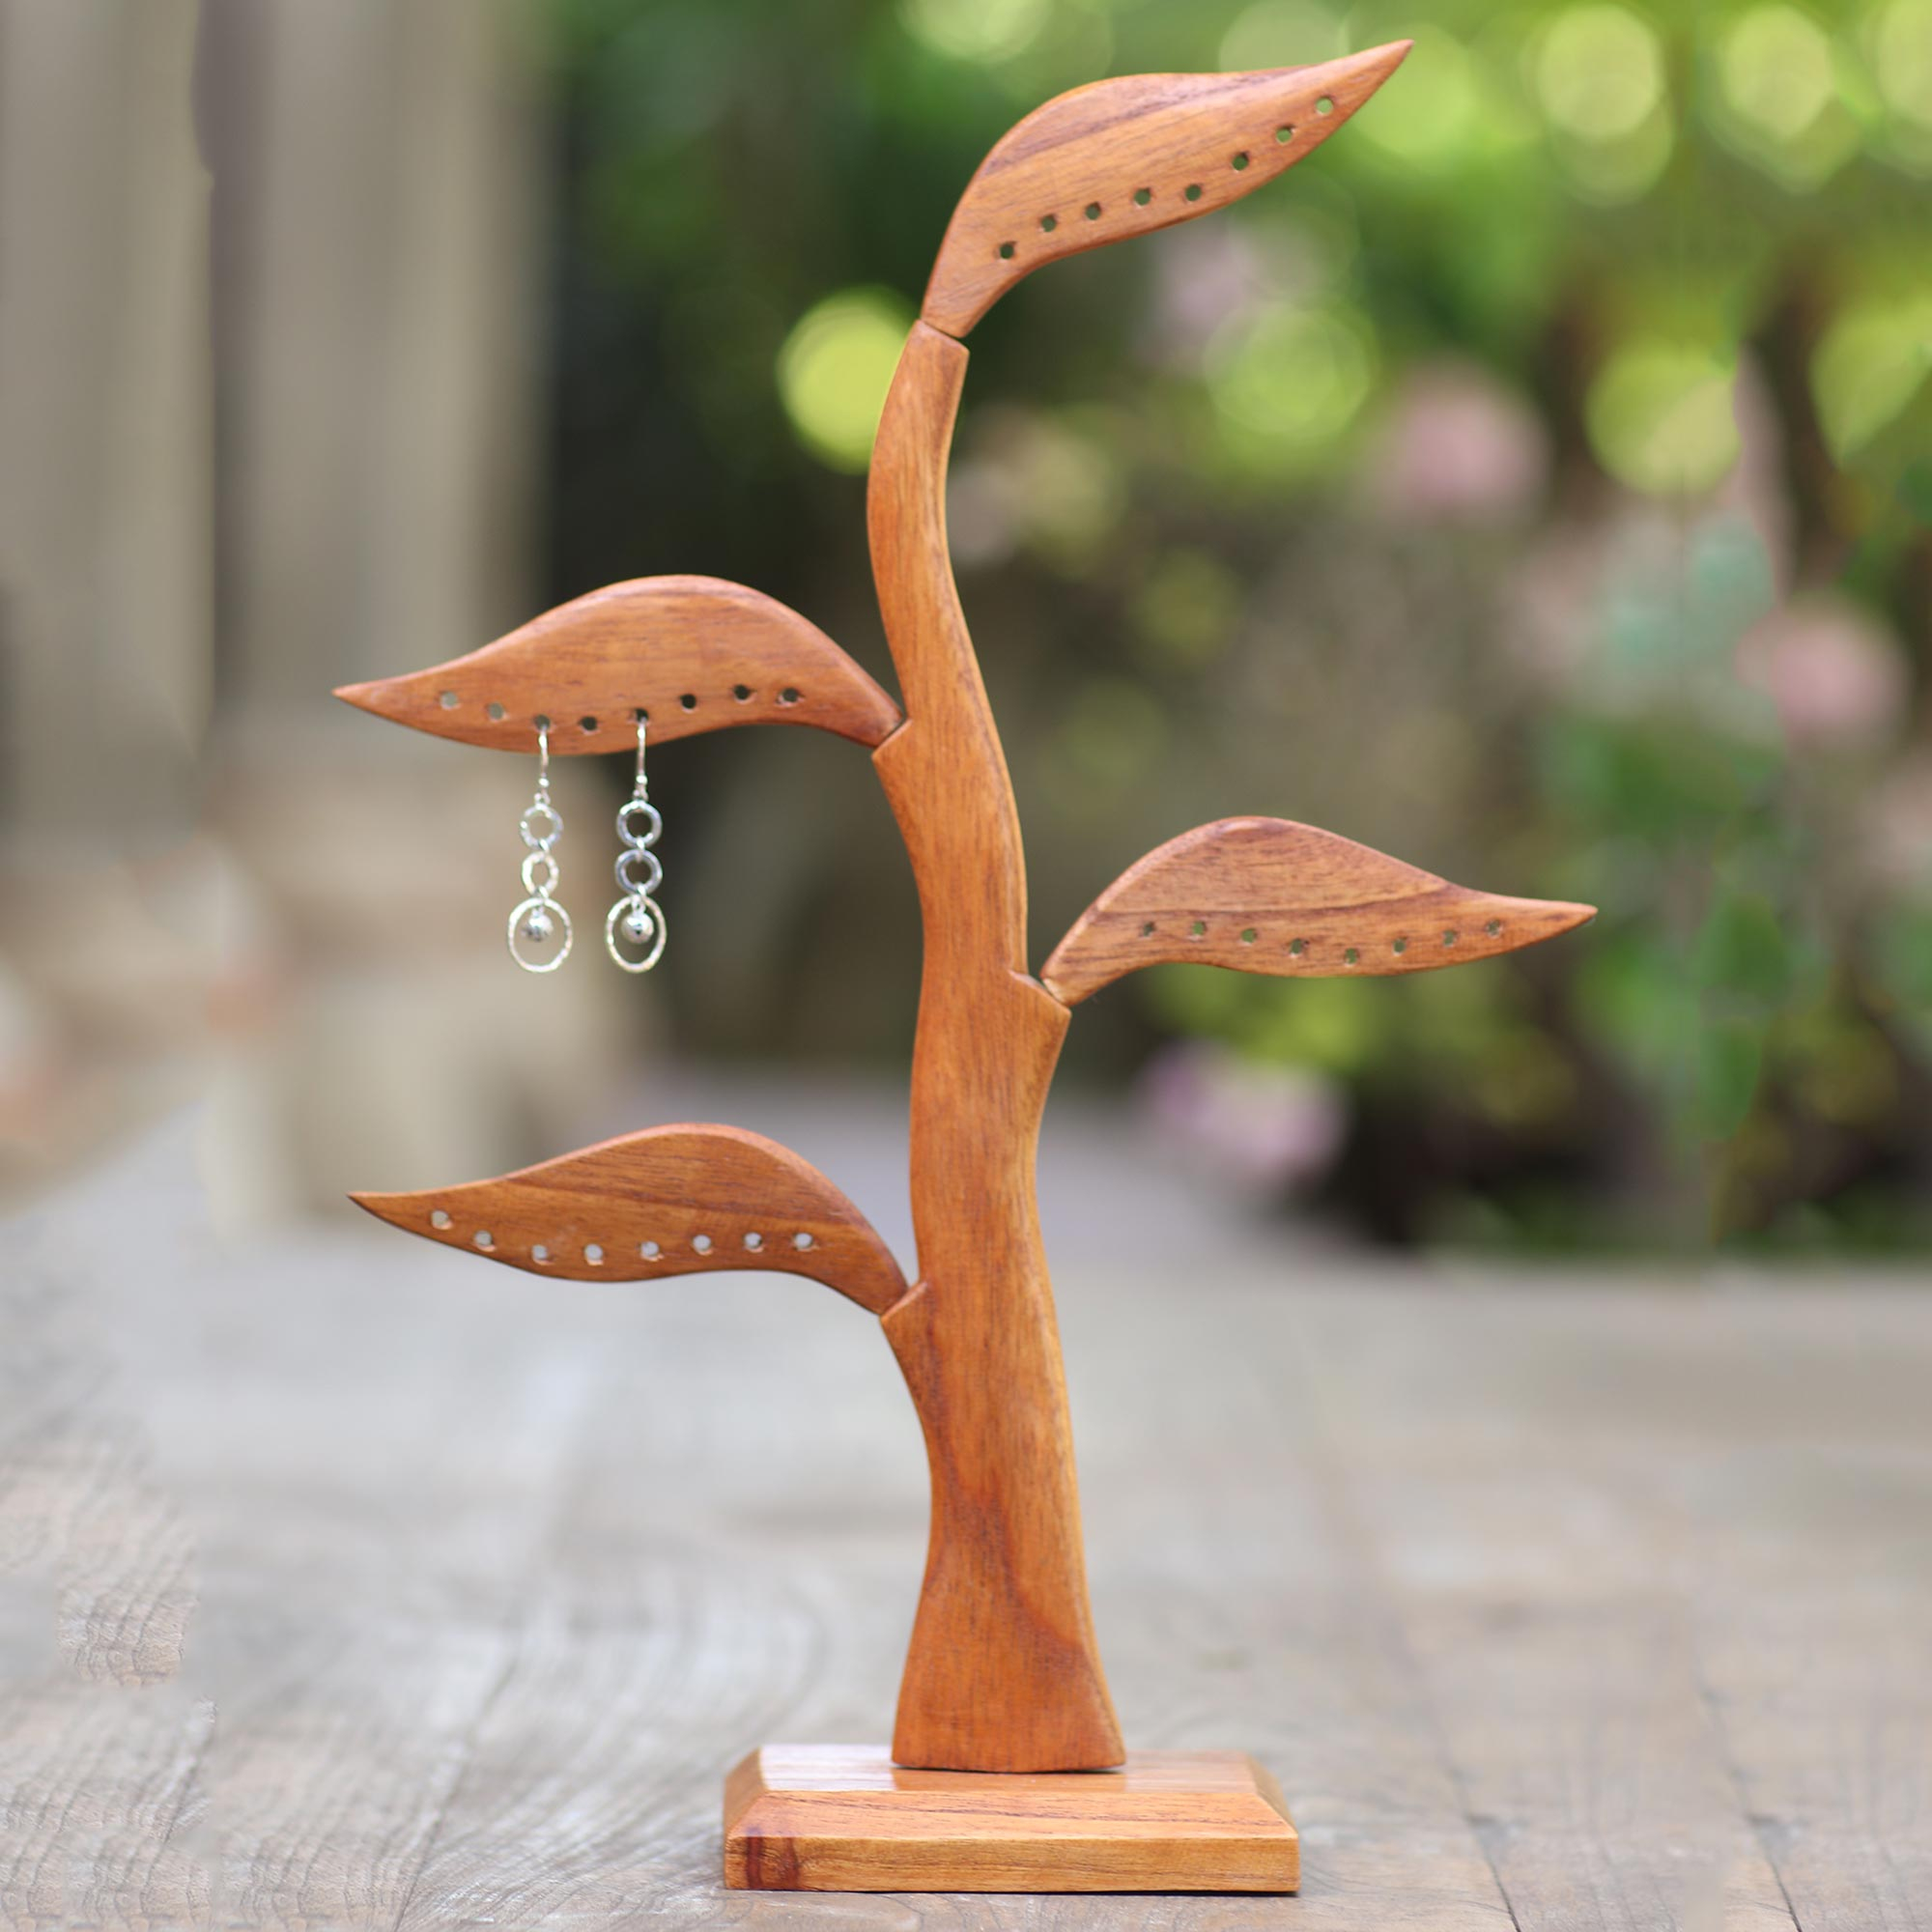 Hand Crafted Jempinis Wood Jewelry Holder - One Touch